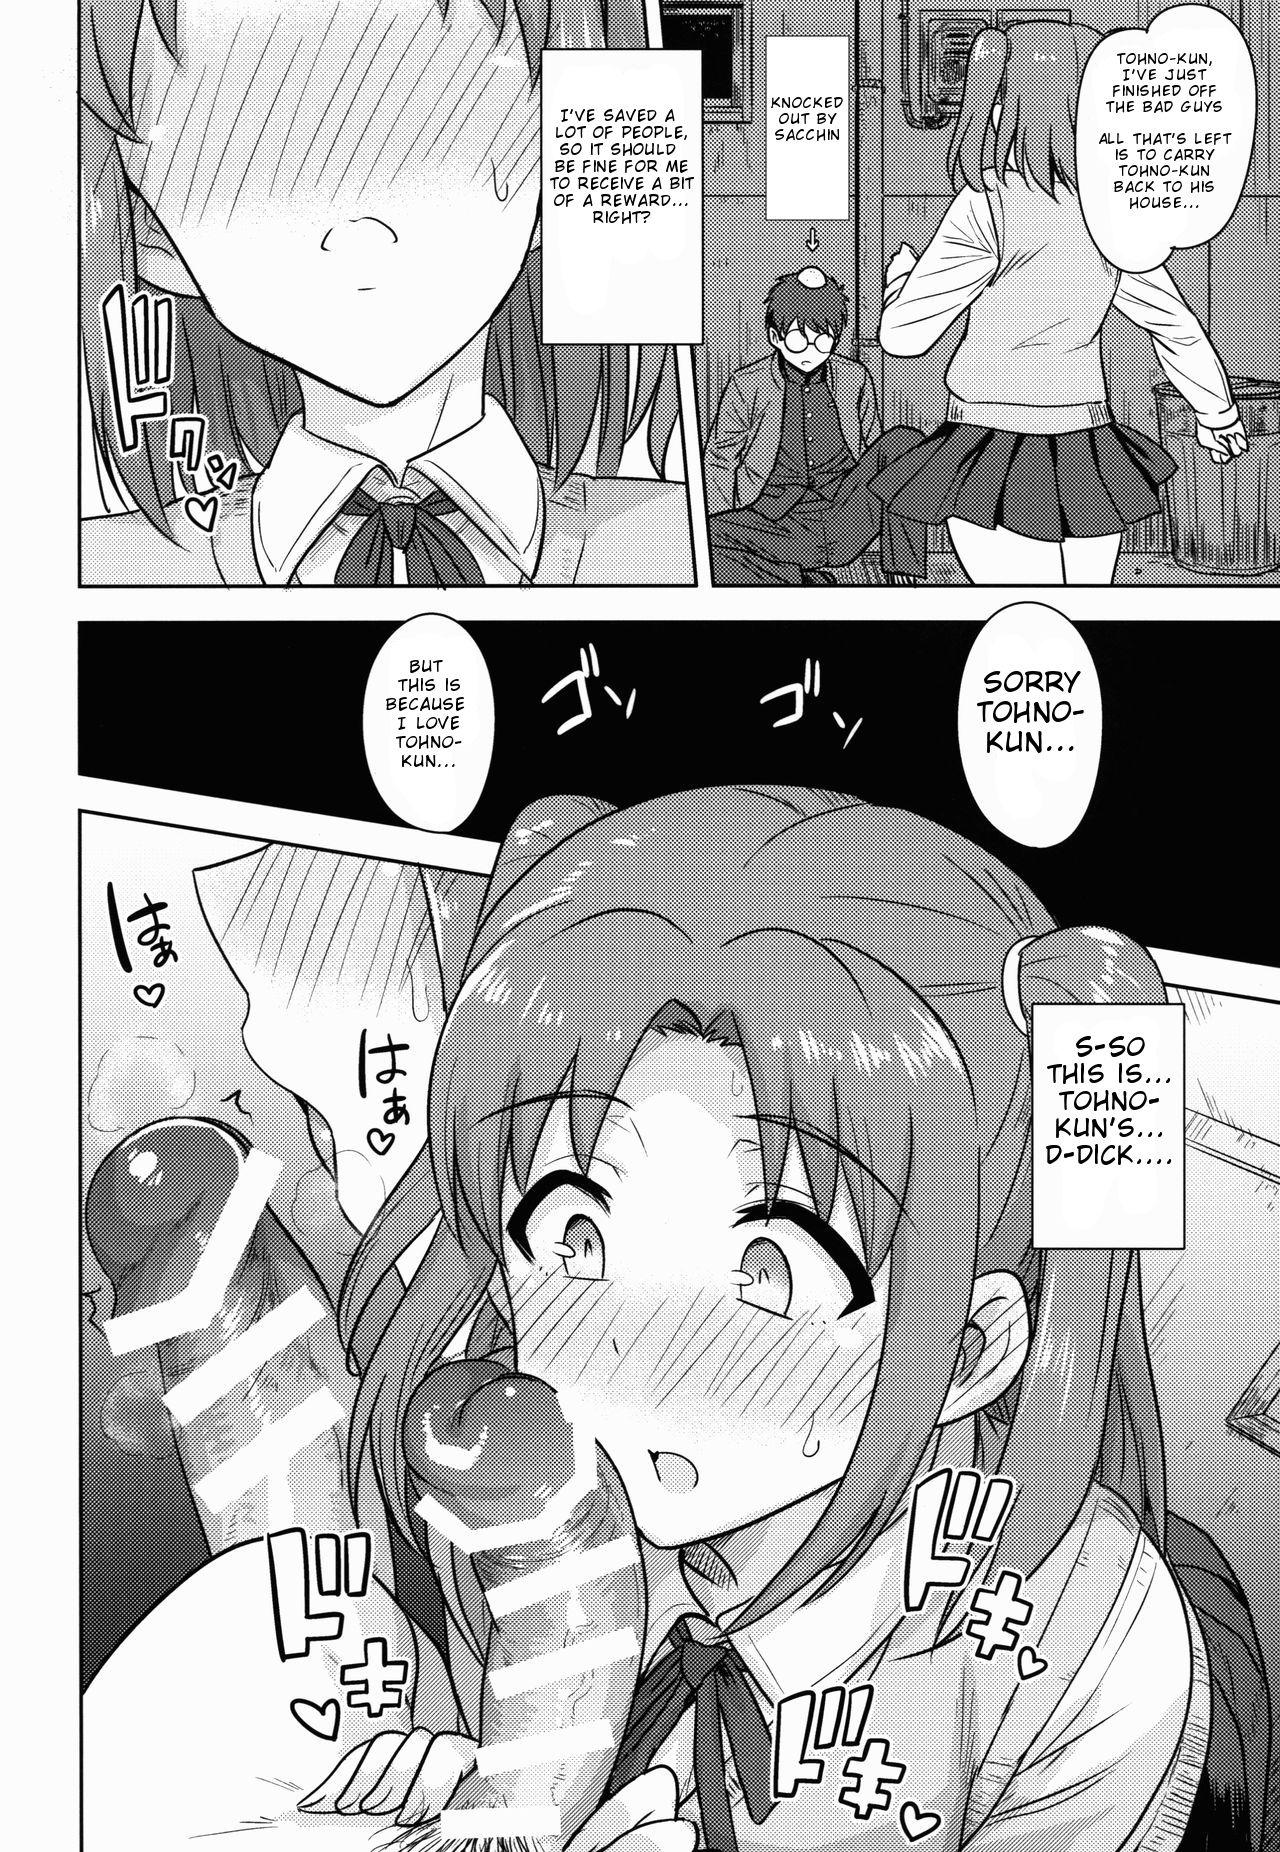 Missionary Aru Hi no Futari MelBlo Hen | A Certain Day with Each Other Melty Blood Hen - Tsukihime Blow Job Contest - Page 10